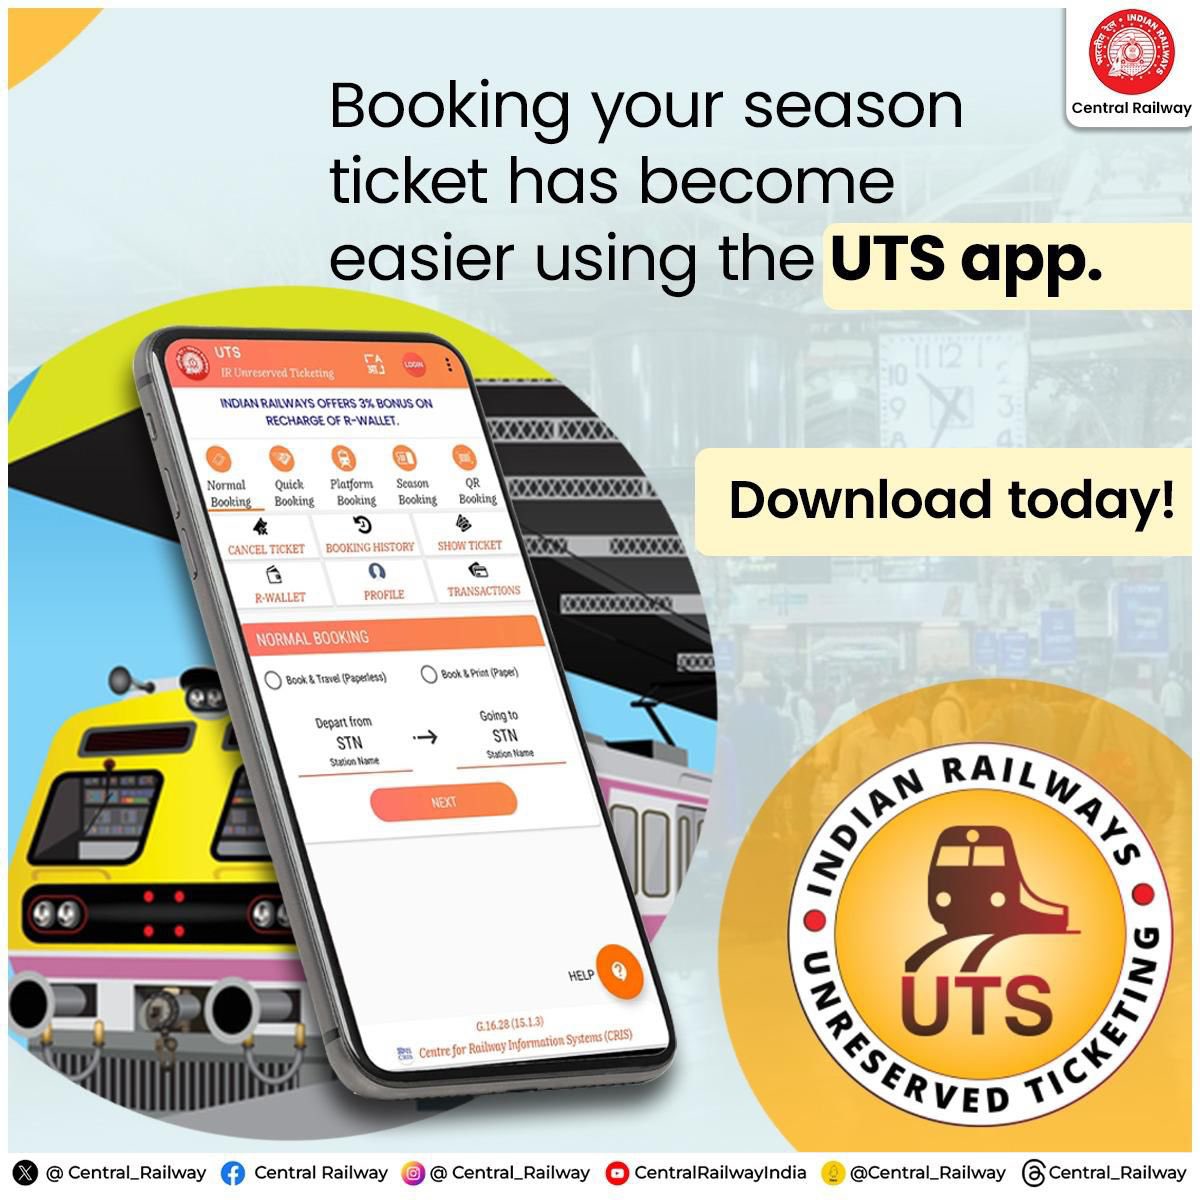 Quit the Queue.
Use the UTS APP to book your tickets. 
The UTS app is here to save your time. 
 Get your season ticket now at one click.
 #CentralRailway #UTSApp